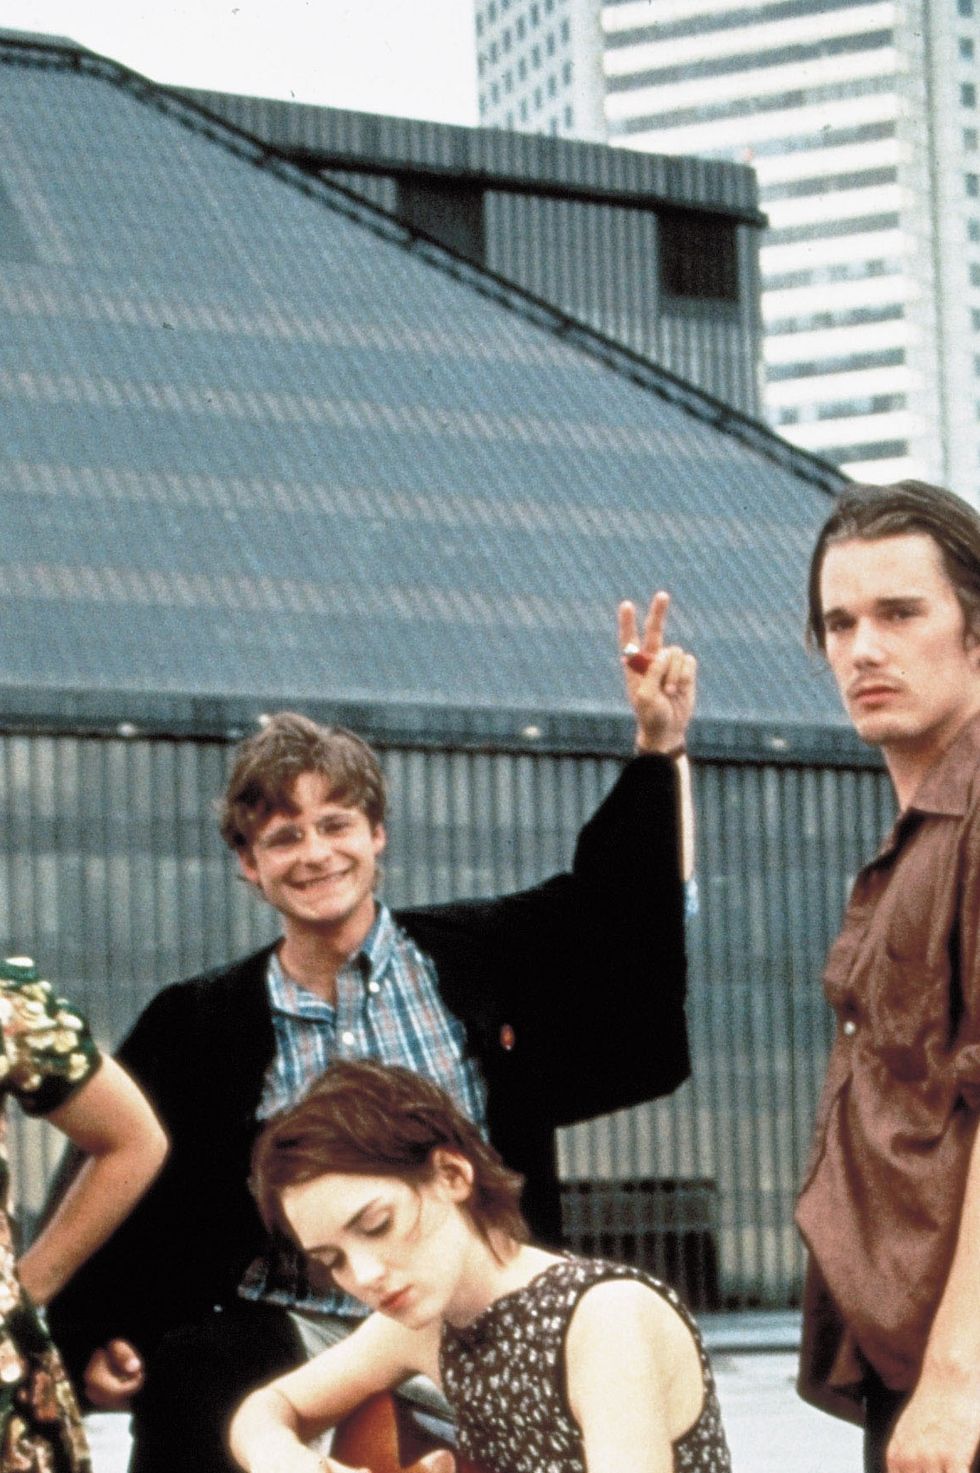 ethan hawke, janeane garofalo, steve zahn and winona ryder in reality bites, 1994, directed by ben stiller copyright universal pictures